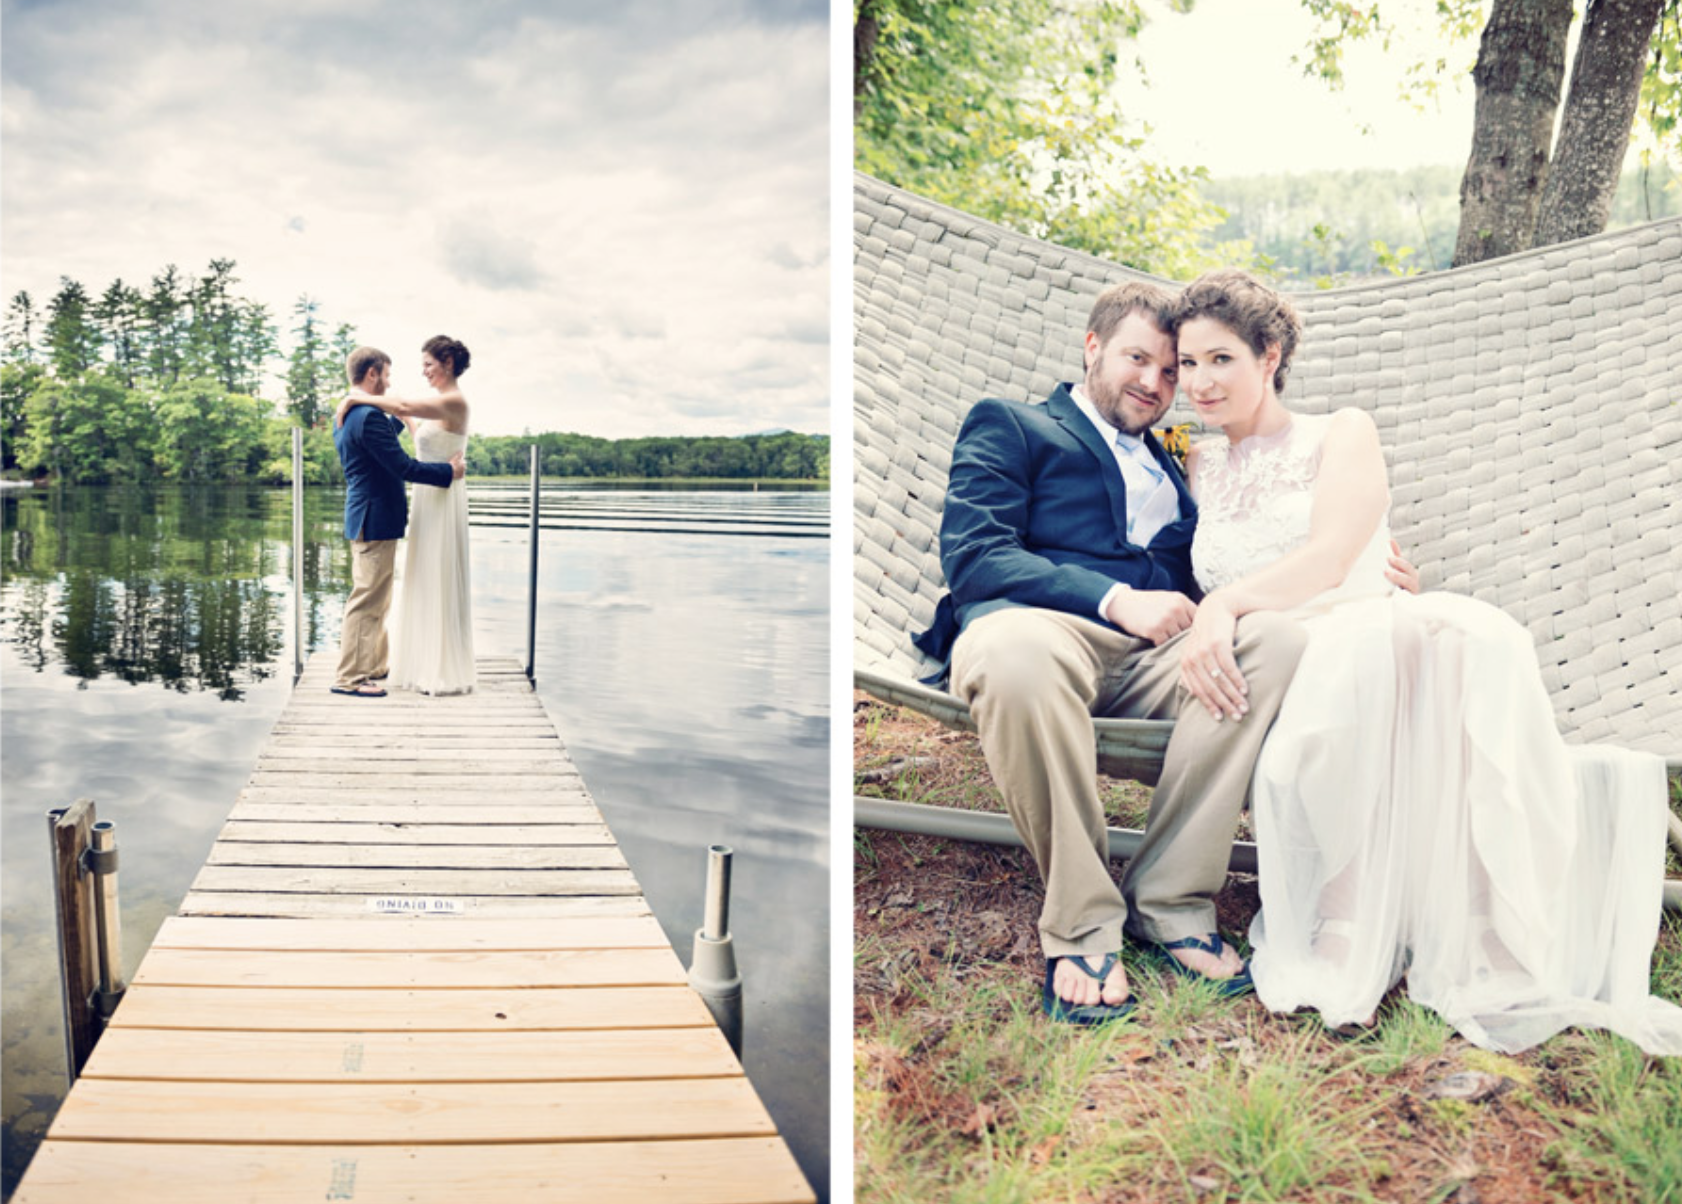 You are currently viewing Jersey and John • Kezar Lakeside Camp Wedding • Lovell, Maine • 8/23/14